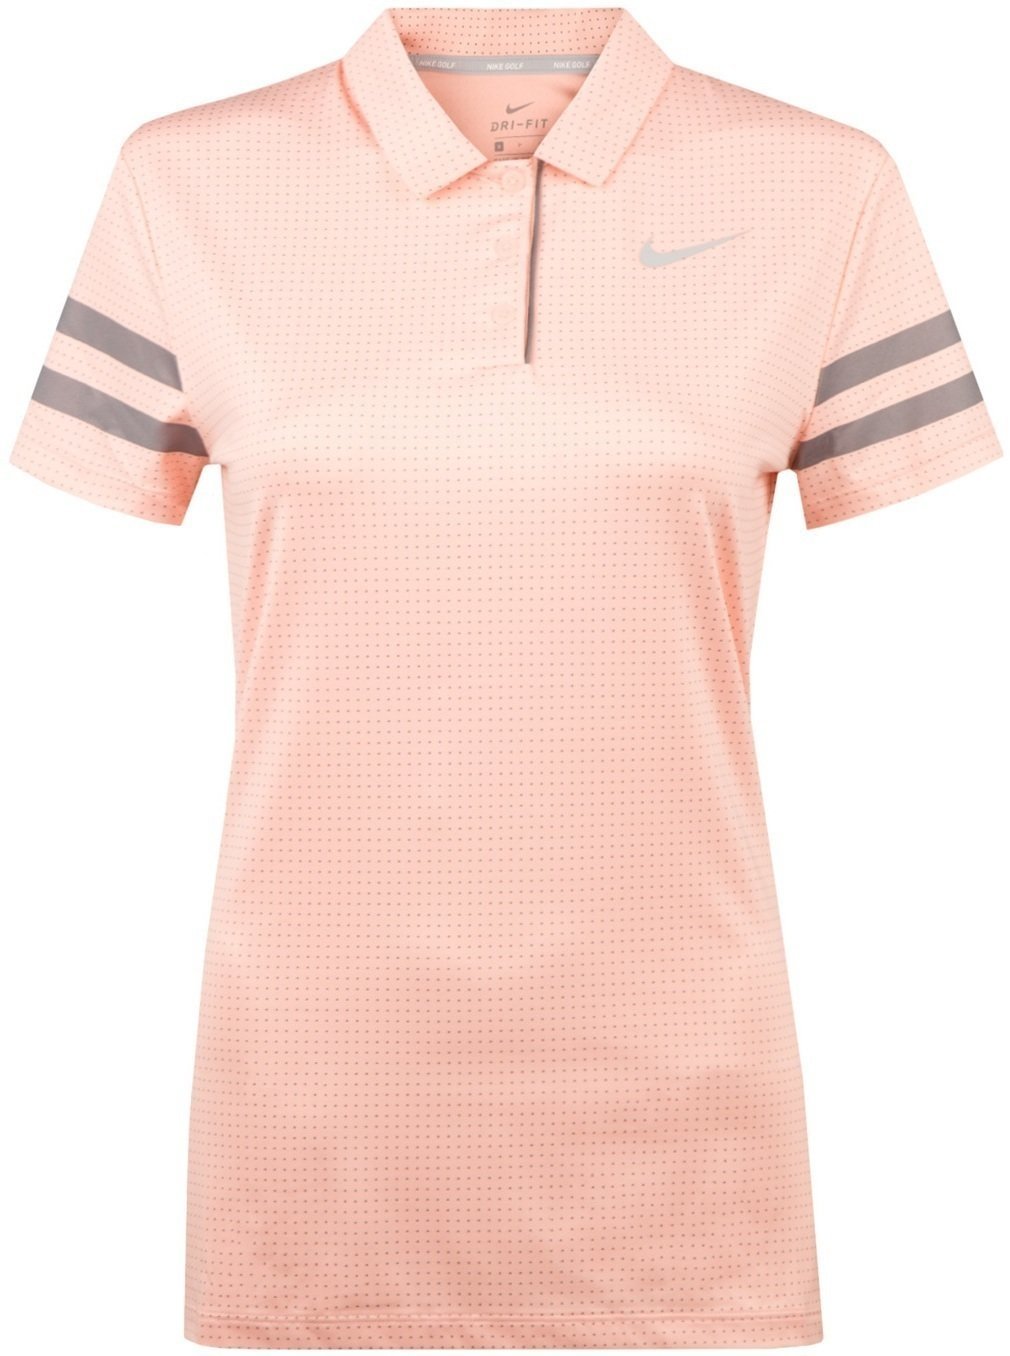 Polo majice Nike Dri-Fit Printed Womens Polo Storm Pink/Anthracite/White XS